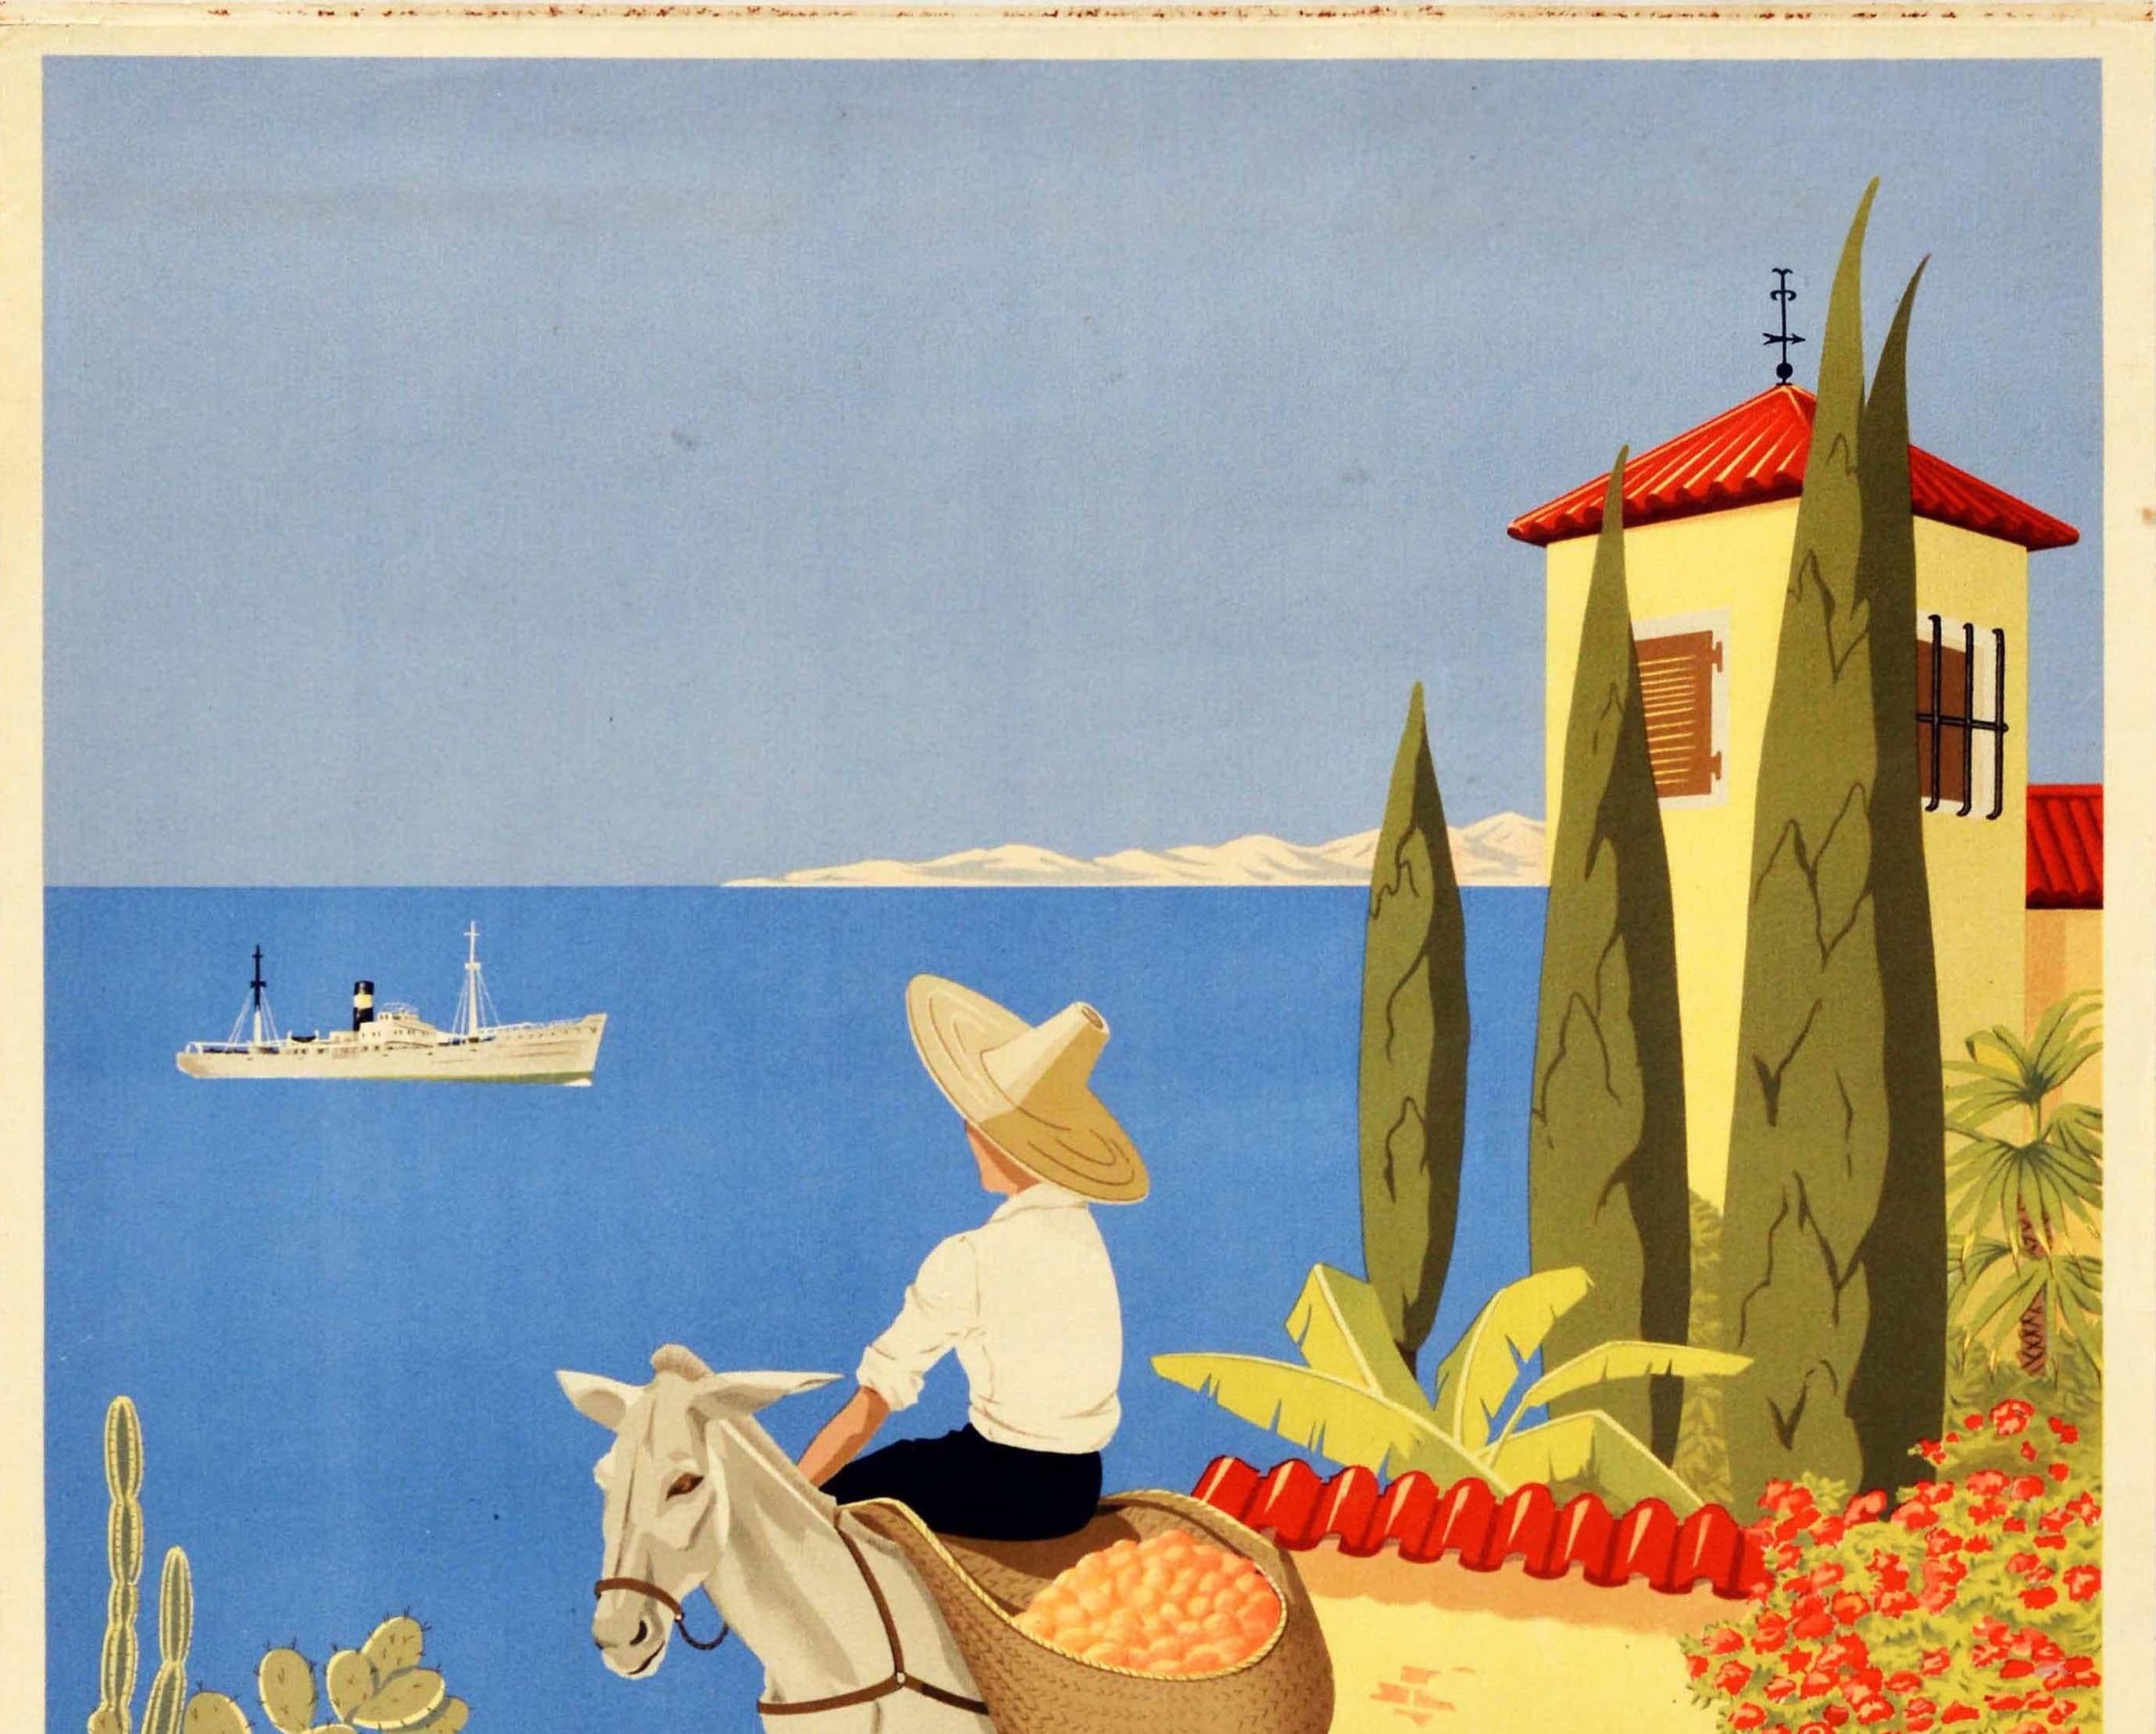 Original vintage cruise travel poster - Reist in den sonnigen Suden mit der Sloman Linie Hamburg / Travel to the sunny South with the Sloman Line Hamburg - with a great image showing a boy on a donkey loaded with goods, watching a cruise ship sail